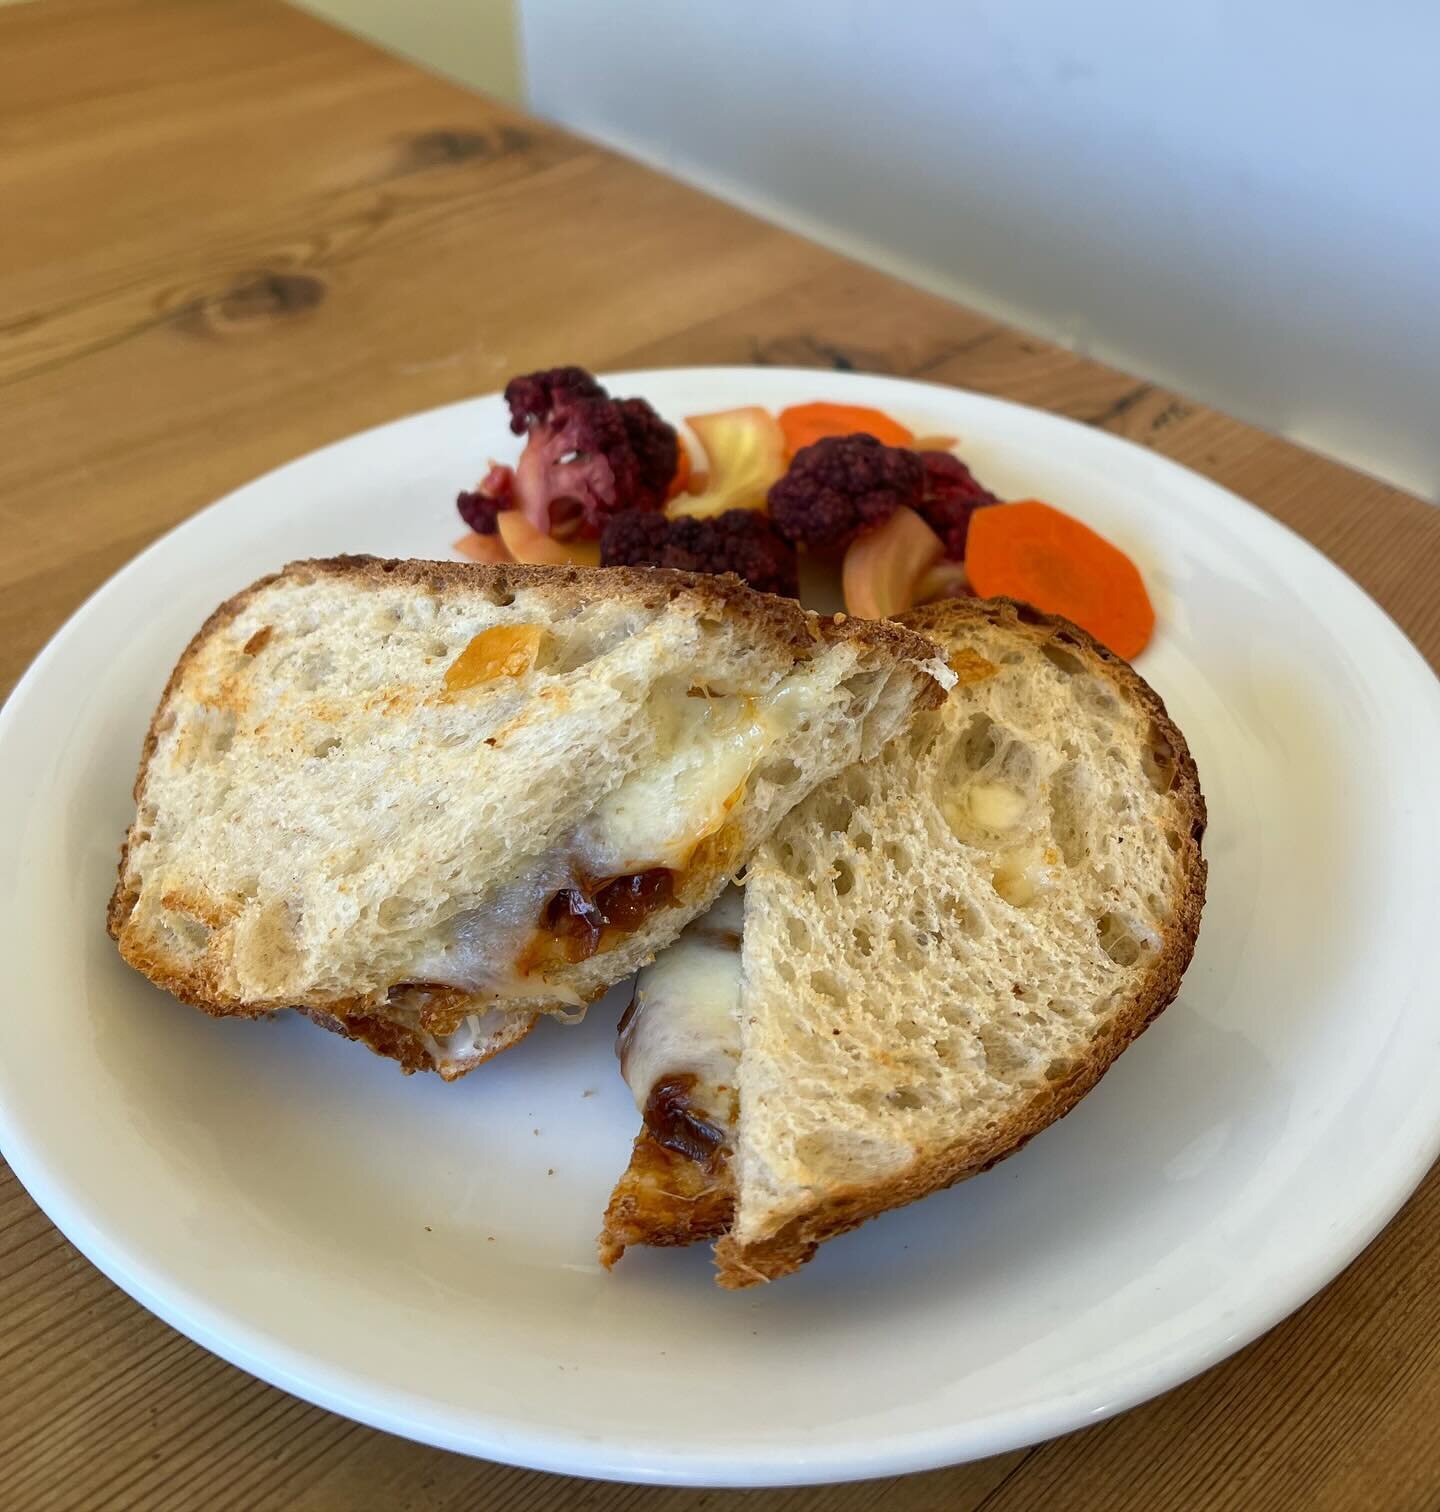 Have you tried our French Grilled Cheese? 
With a ridiculously good combination of cheese and carmelized onions, and a side of house made pickled veggies, it&rsquo;s sure to please!! 
Come on by and try it. 😋🇫🇷

#grilledcheese #lunch #vegetarian #